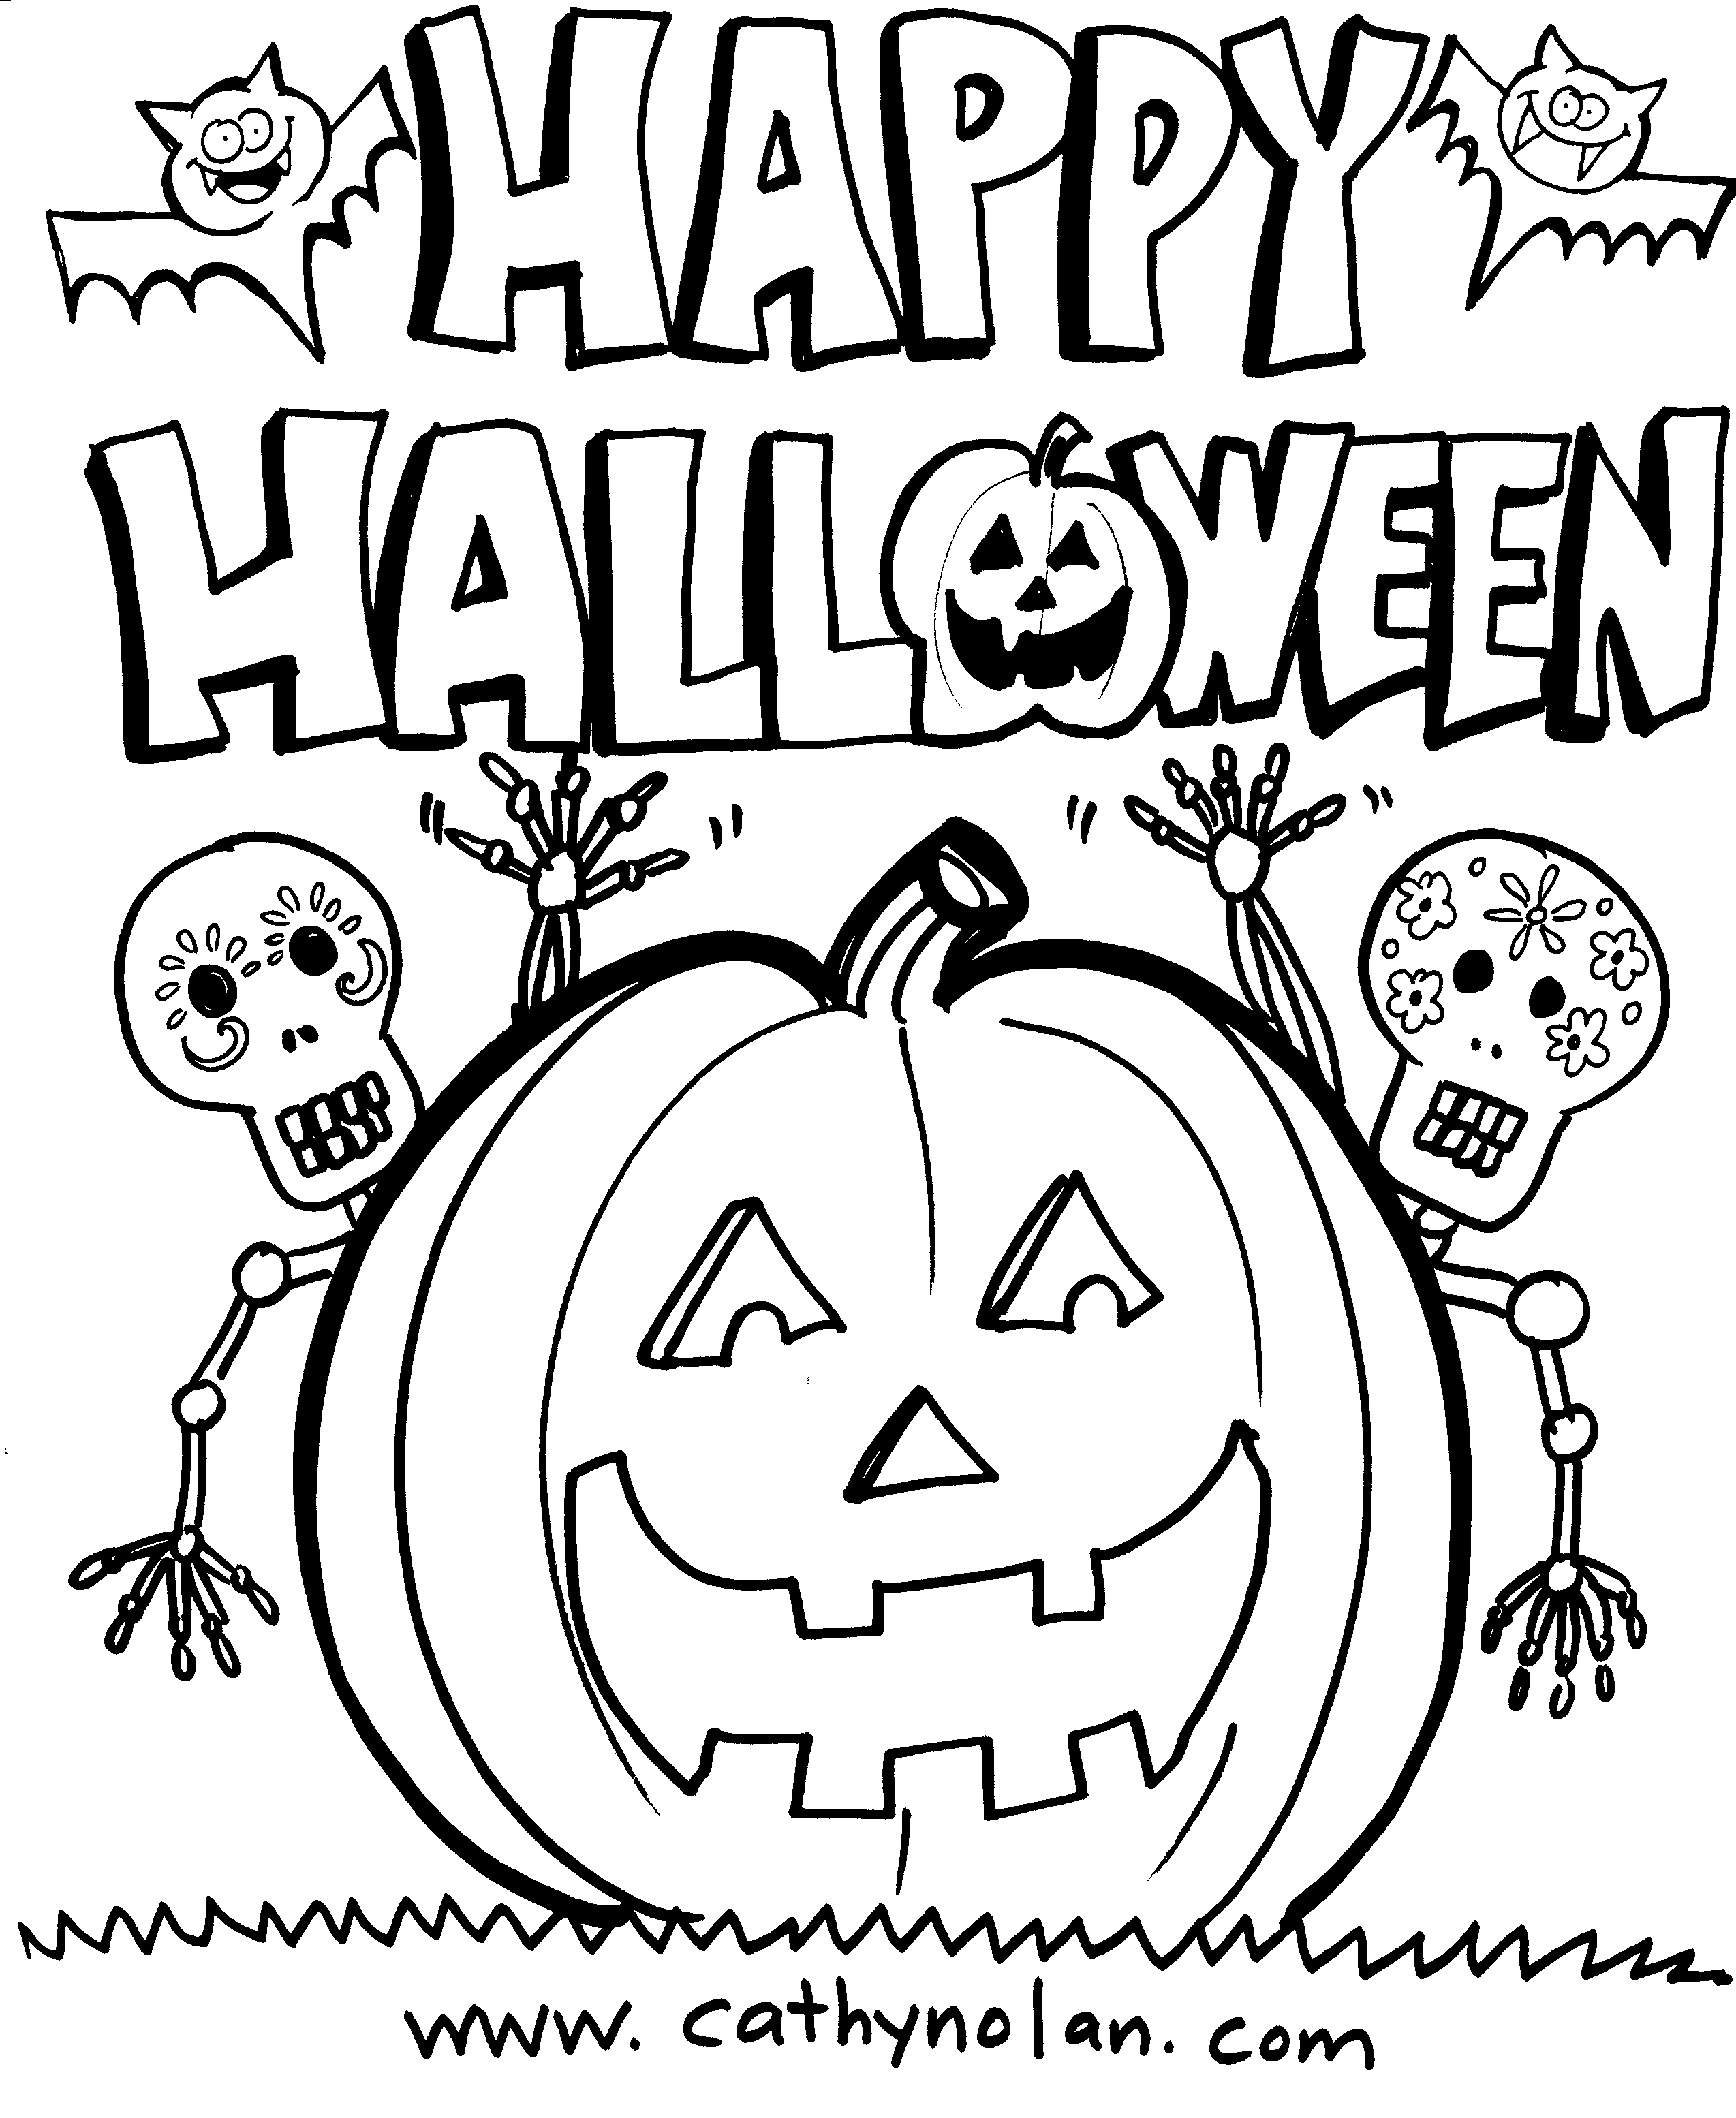 Happy Jack O Lantern Coloring Pages Downloadable Happy Halloween Coloring Sheets For The Kids Cathy Nolan